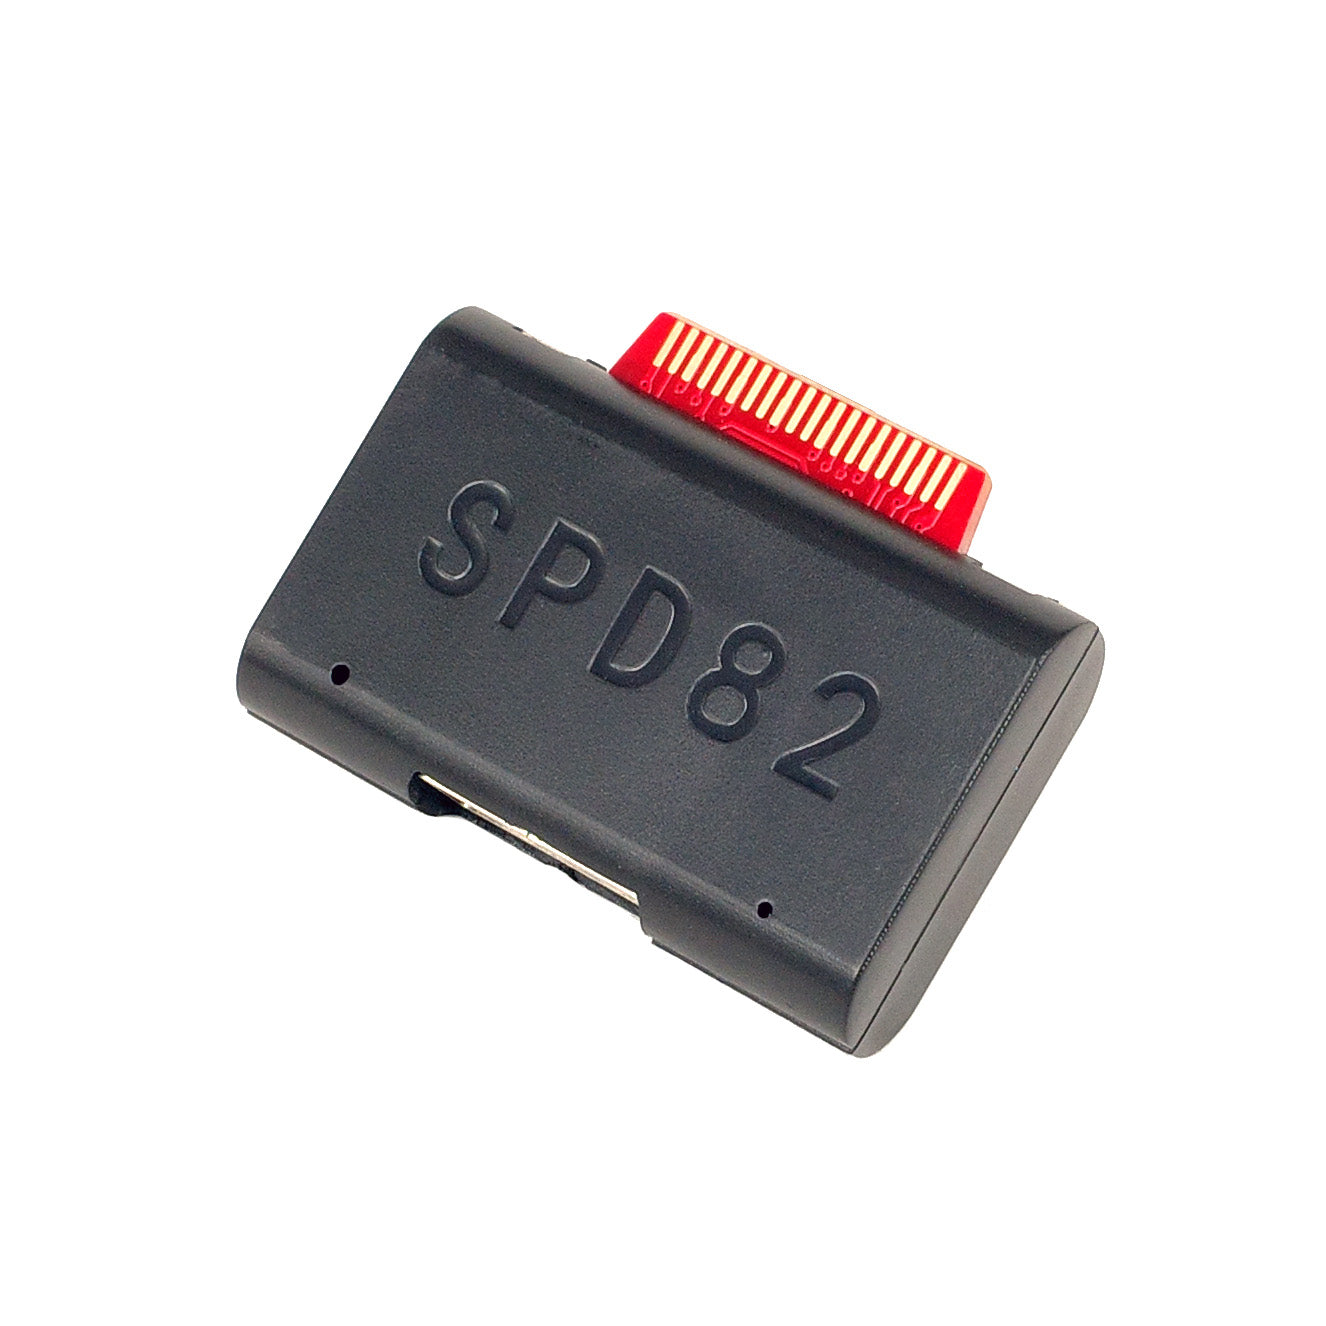 SPD82 Pro for Microsoft Surface Pro Book Connect to USB-C Charging Adapter Converter